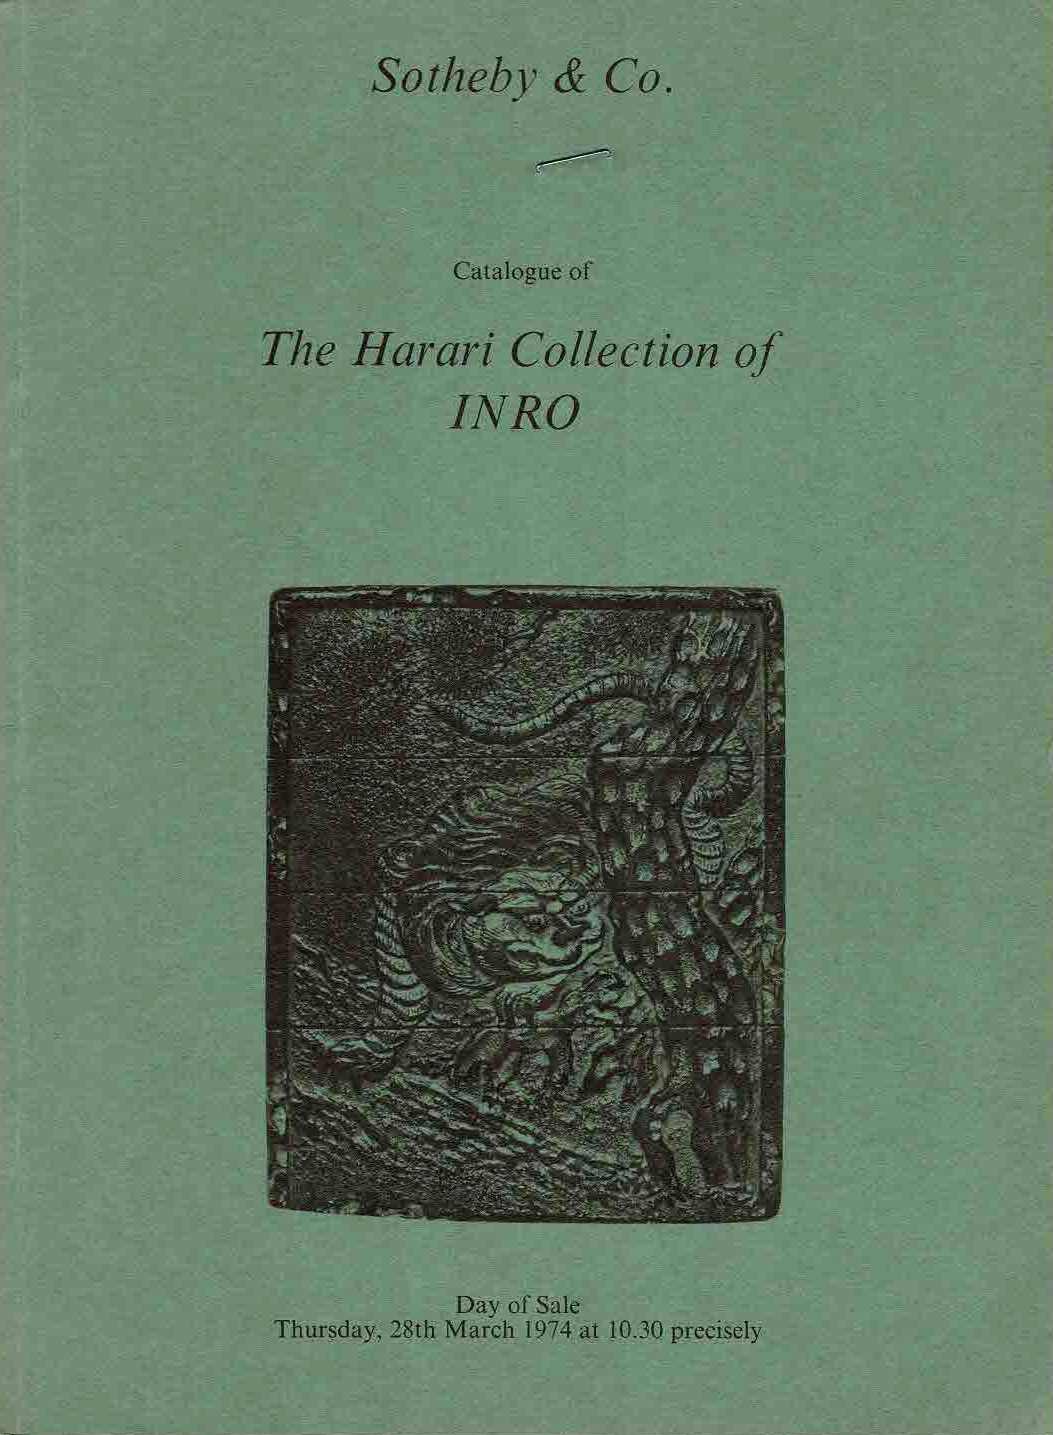 Sotheby & Co. - Catalogue of the Harari Collection of Inro. Sold by the executors of the late Mrs. Manya Harari comprising examples from 17th to the 19th centuries and including an interesting series of Inro from the Korin-Soetsu school, series from the Haritsu, Kajikawa, Koma, Toyo and other major schools. Rare inro with subjects taken from paintings and ukiyo-e woodblock prints. Inro in a comprehensive range of materials including lacquer, metal, ivory, wood and tortoiseshell.